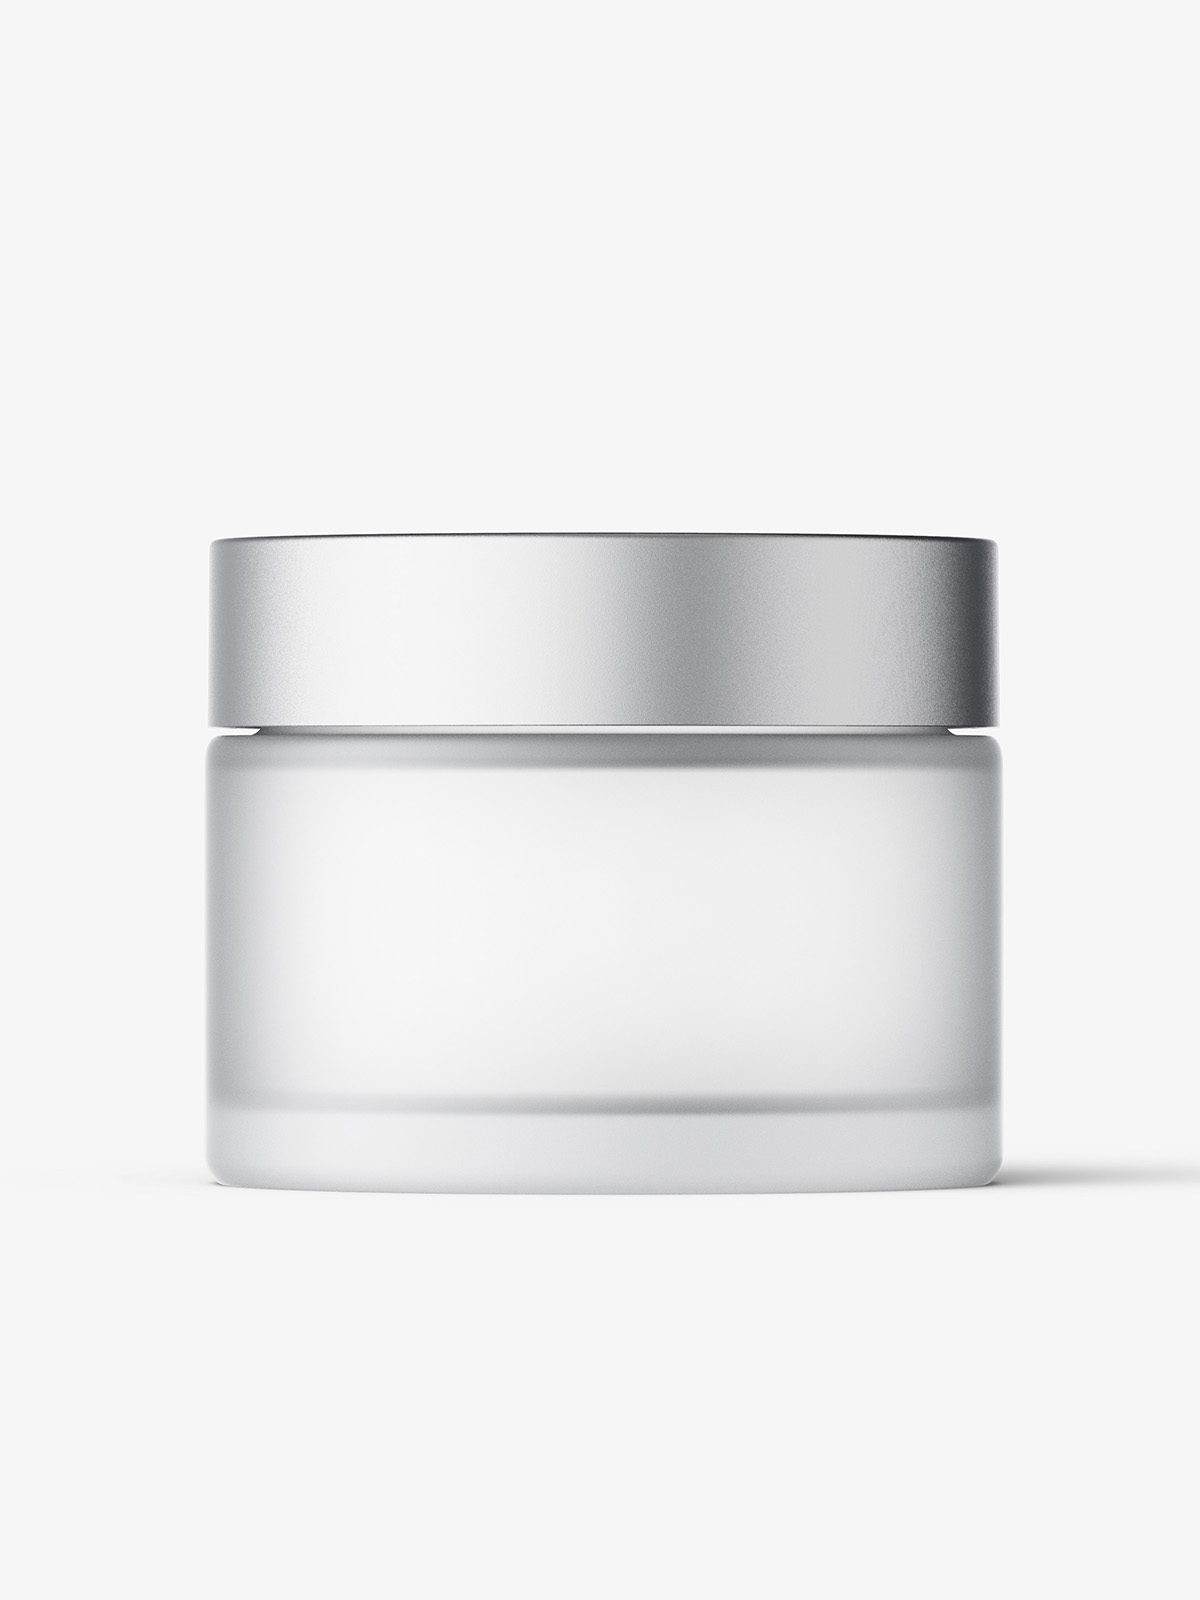 Download Frosted Cosmetic Jar With Metallic Cap Mockup Smarty Mockups